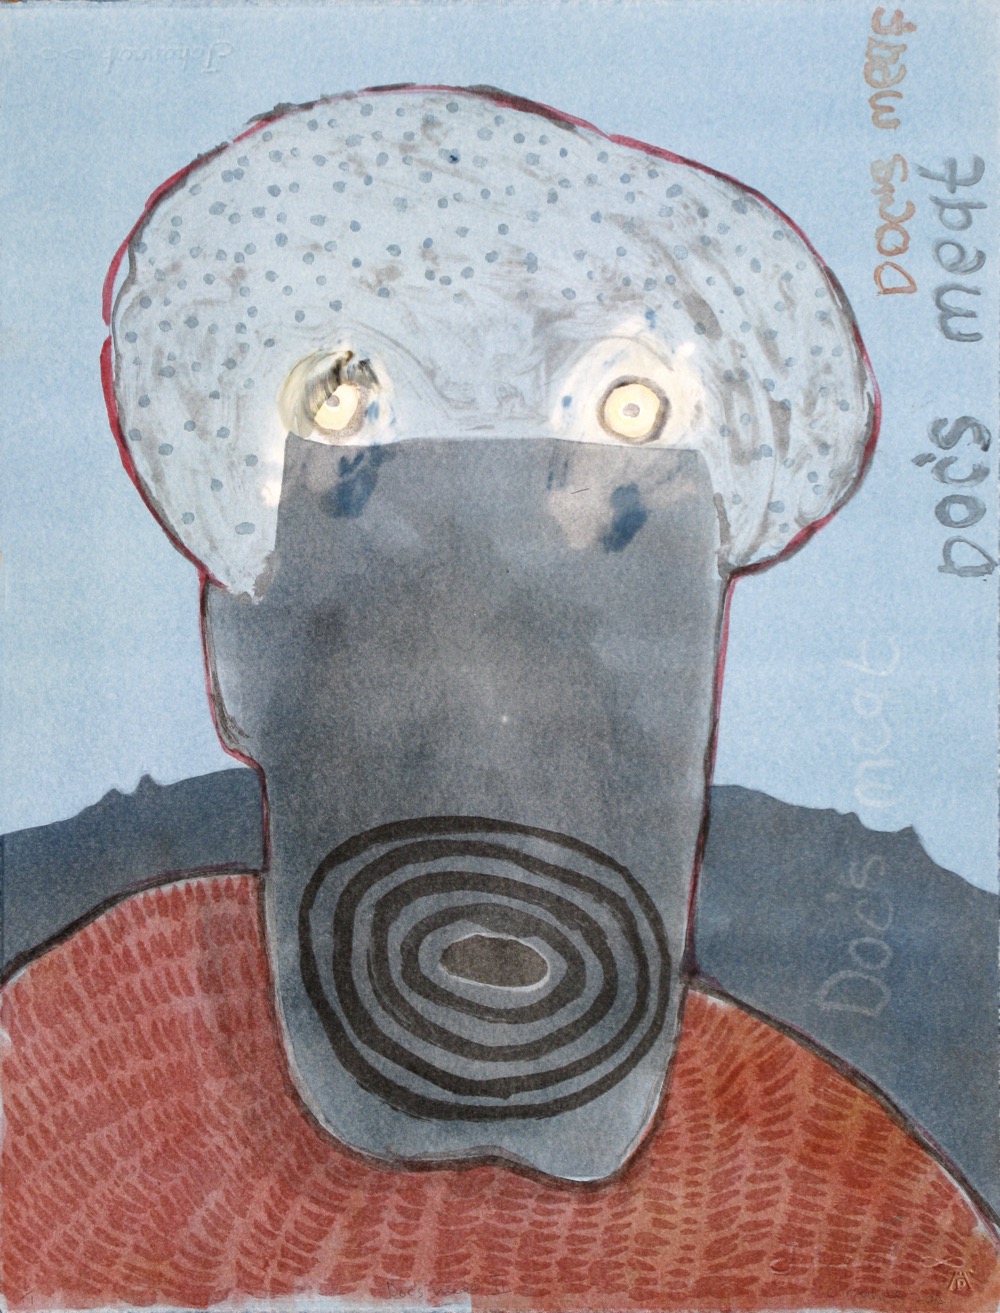 Human head and shoulders form with abstracted facial features set in a landscape with text